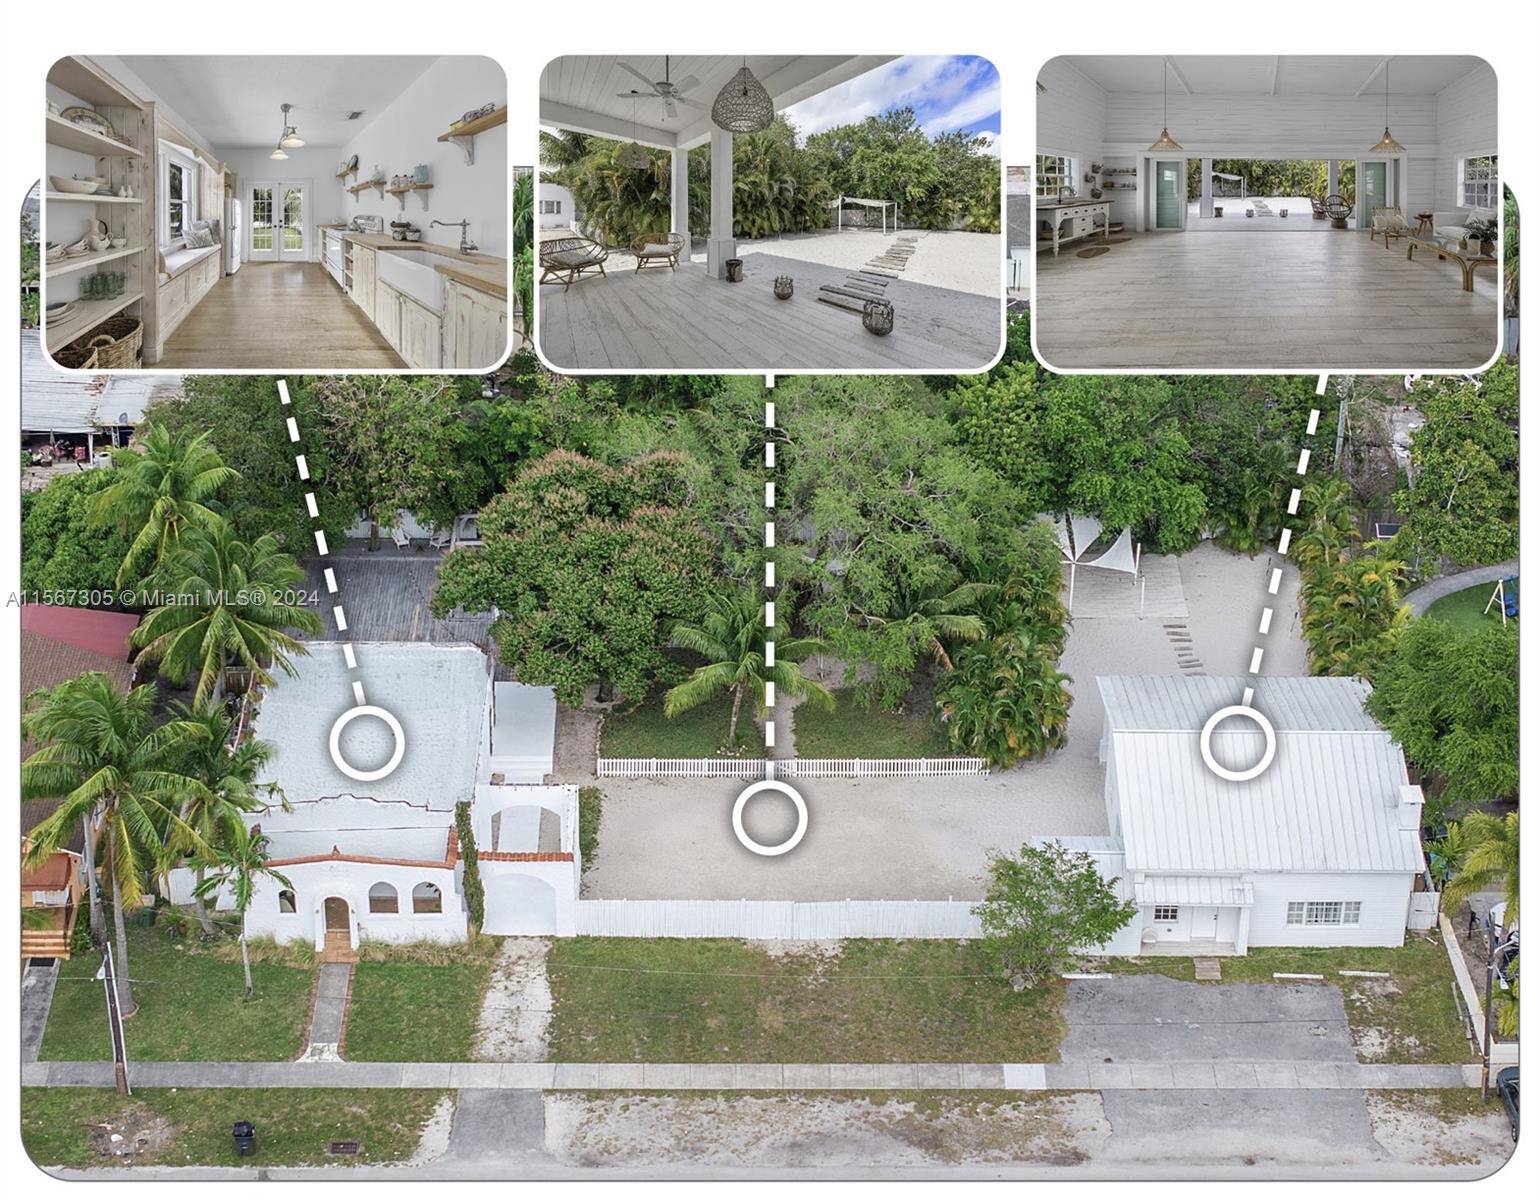 Own a Beautiful Oasis within the downtown area of North Miami.